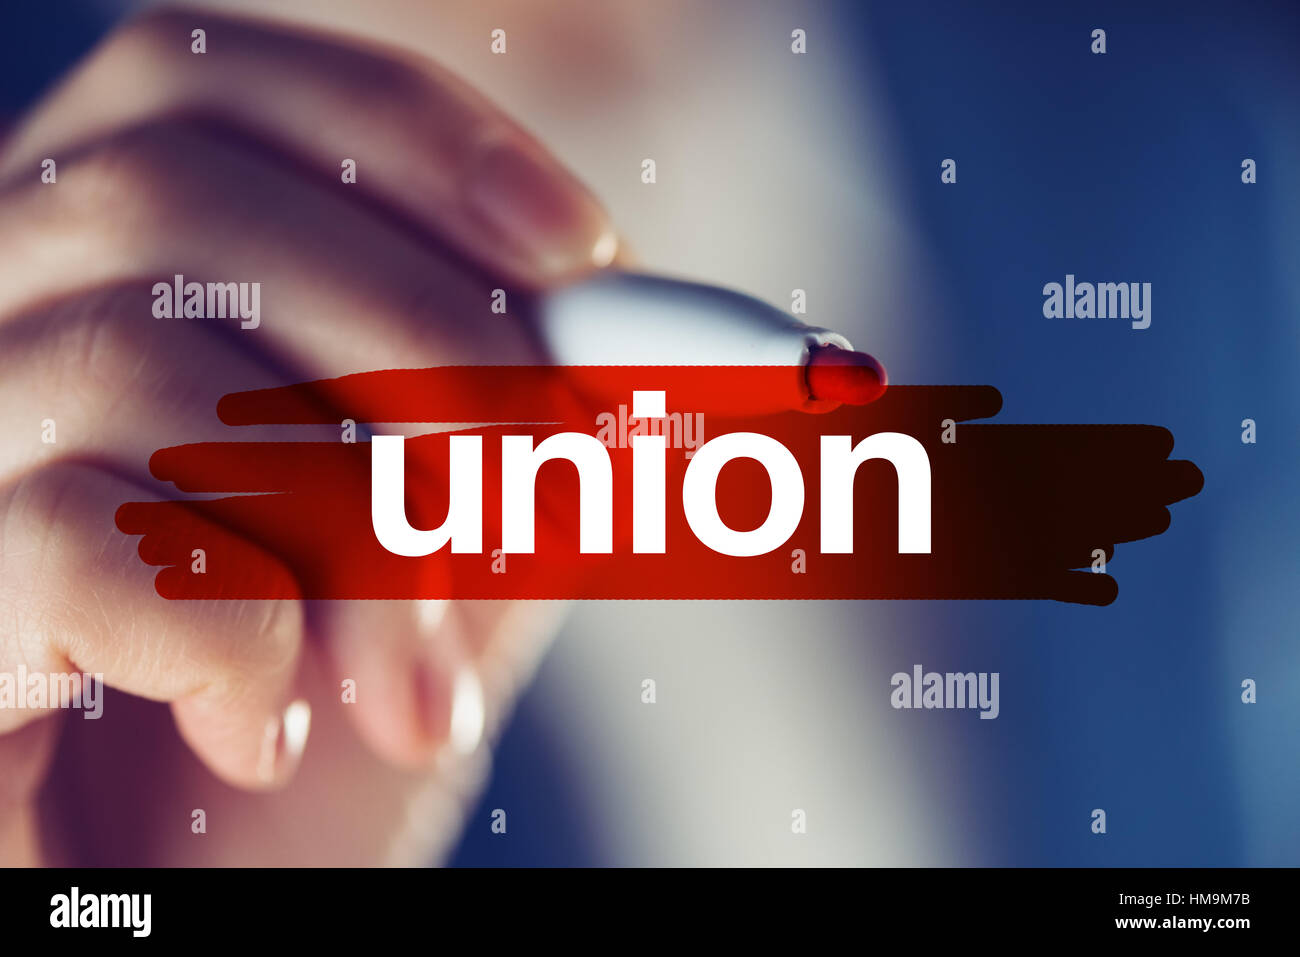 Business union concept, businesswoman highlighting word with red marker pen Stock Photo